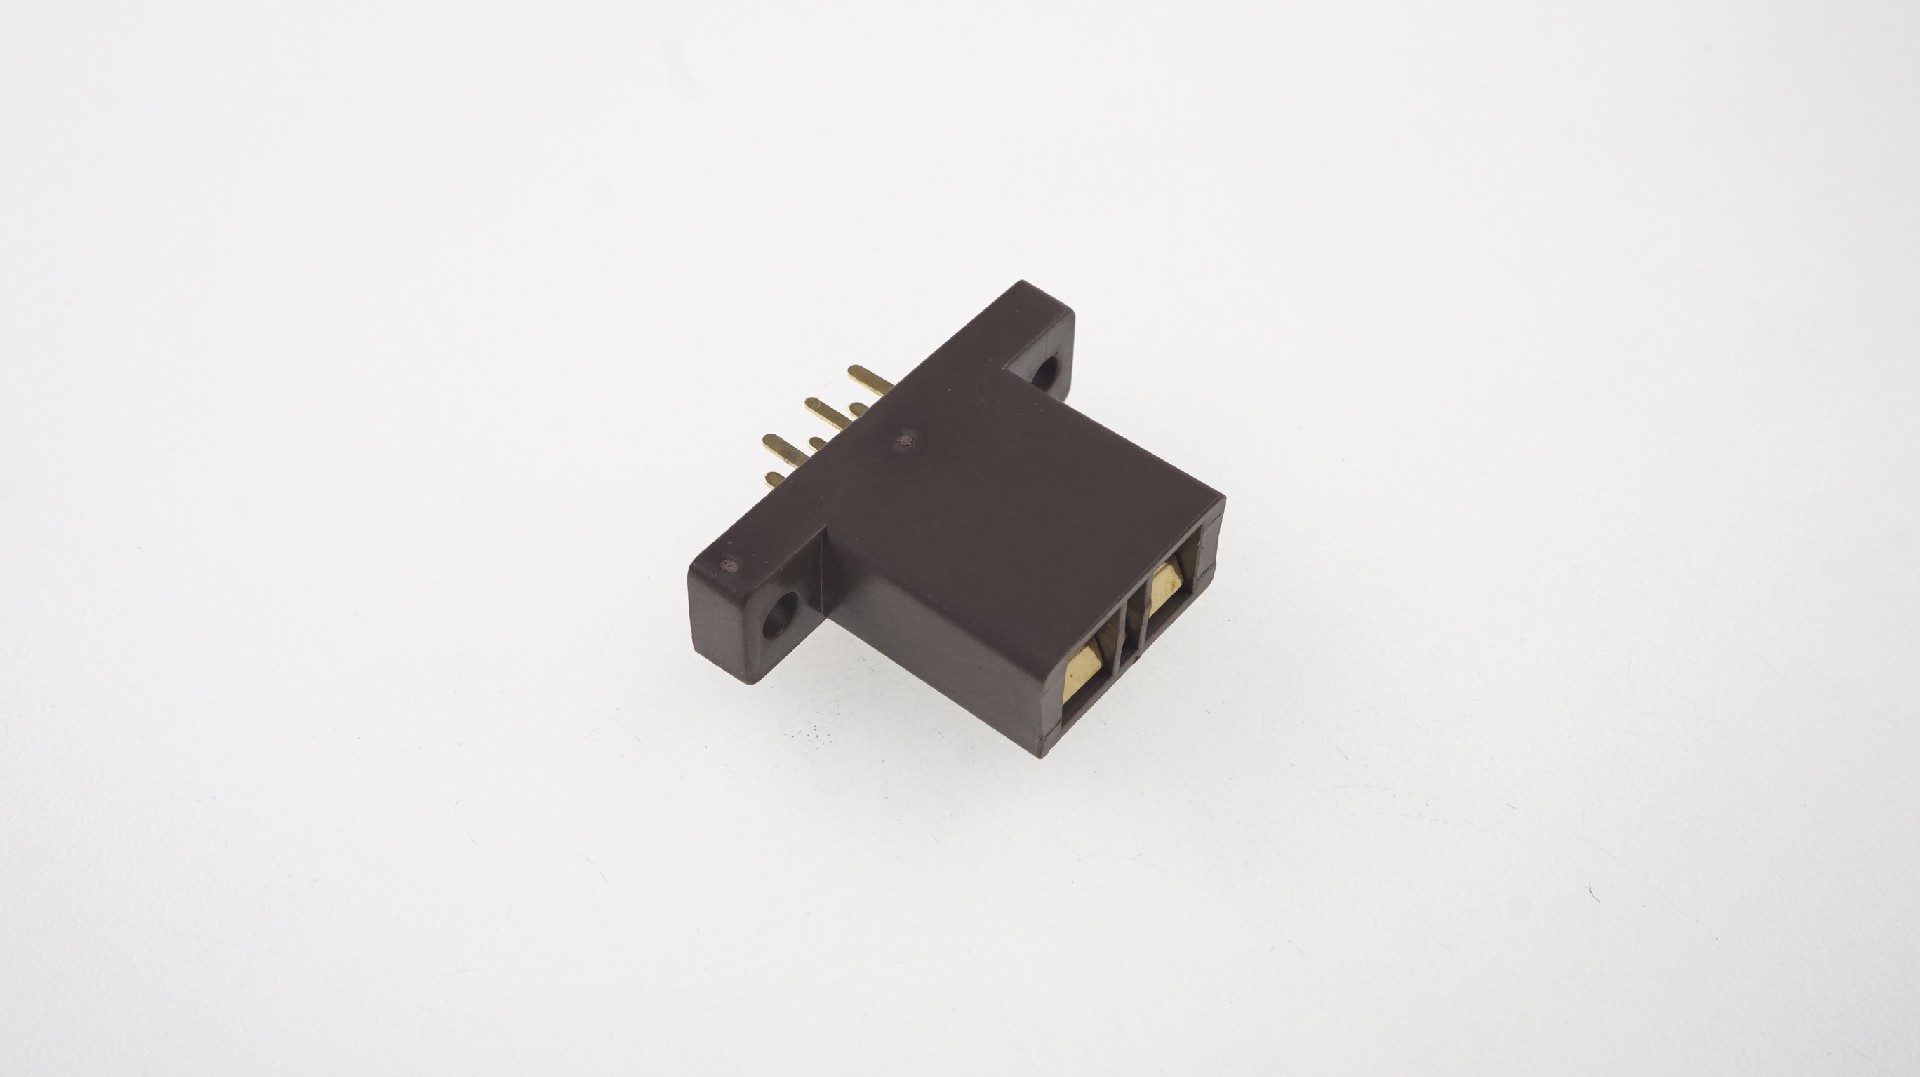 Burn In Socket 3 Poles for Diode Triode Package TO-3P TO-247 5.08mm Through Hole PCB Burn-in Gold Plated Test Receptacle